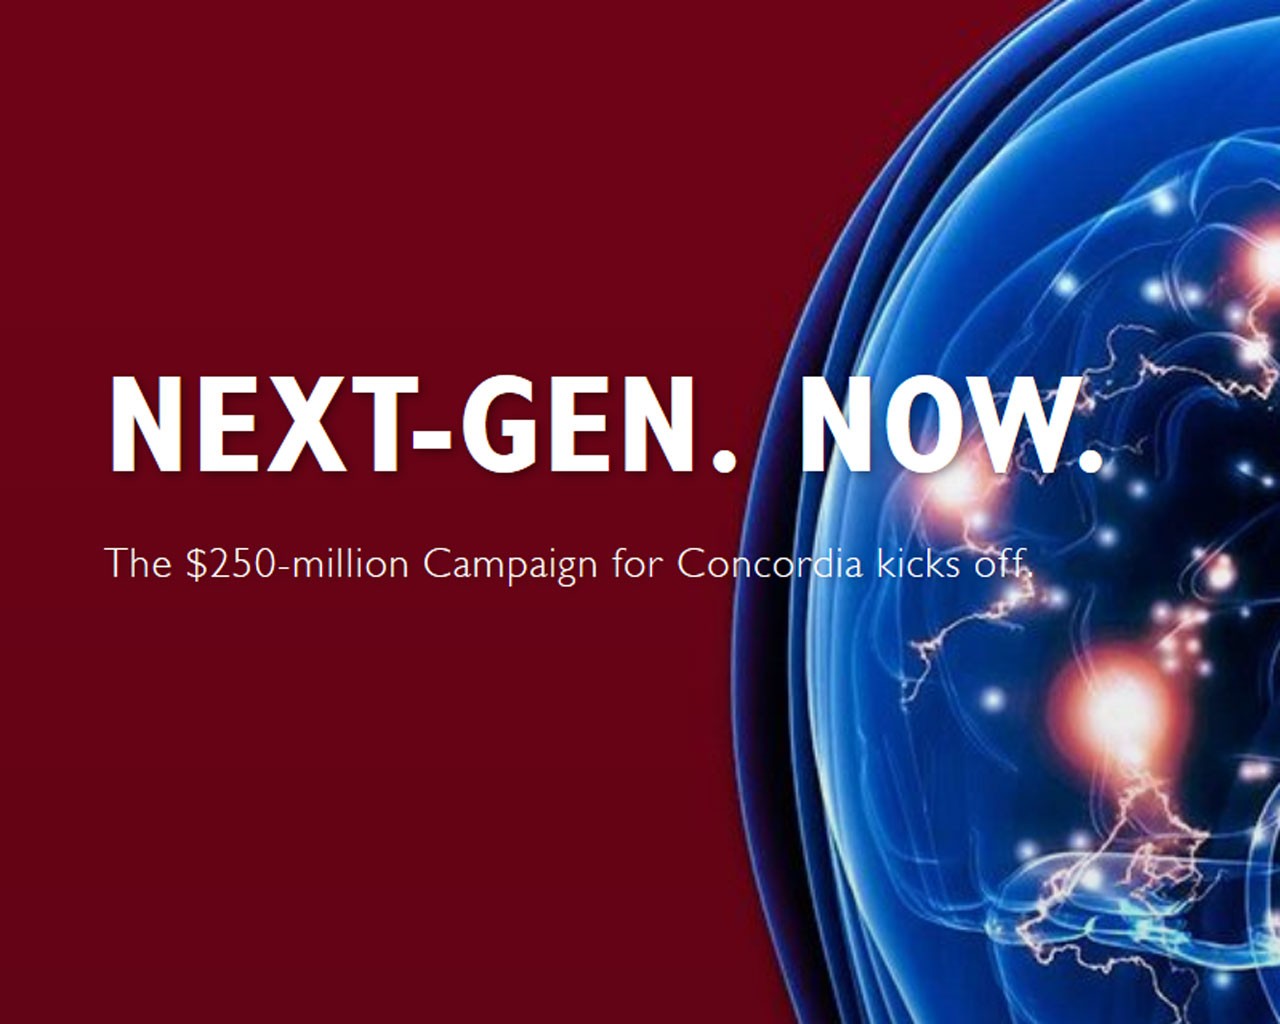 The Campaign for Concordia: Next-Gen. Now.